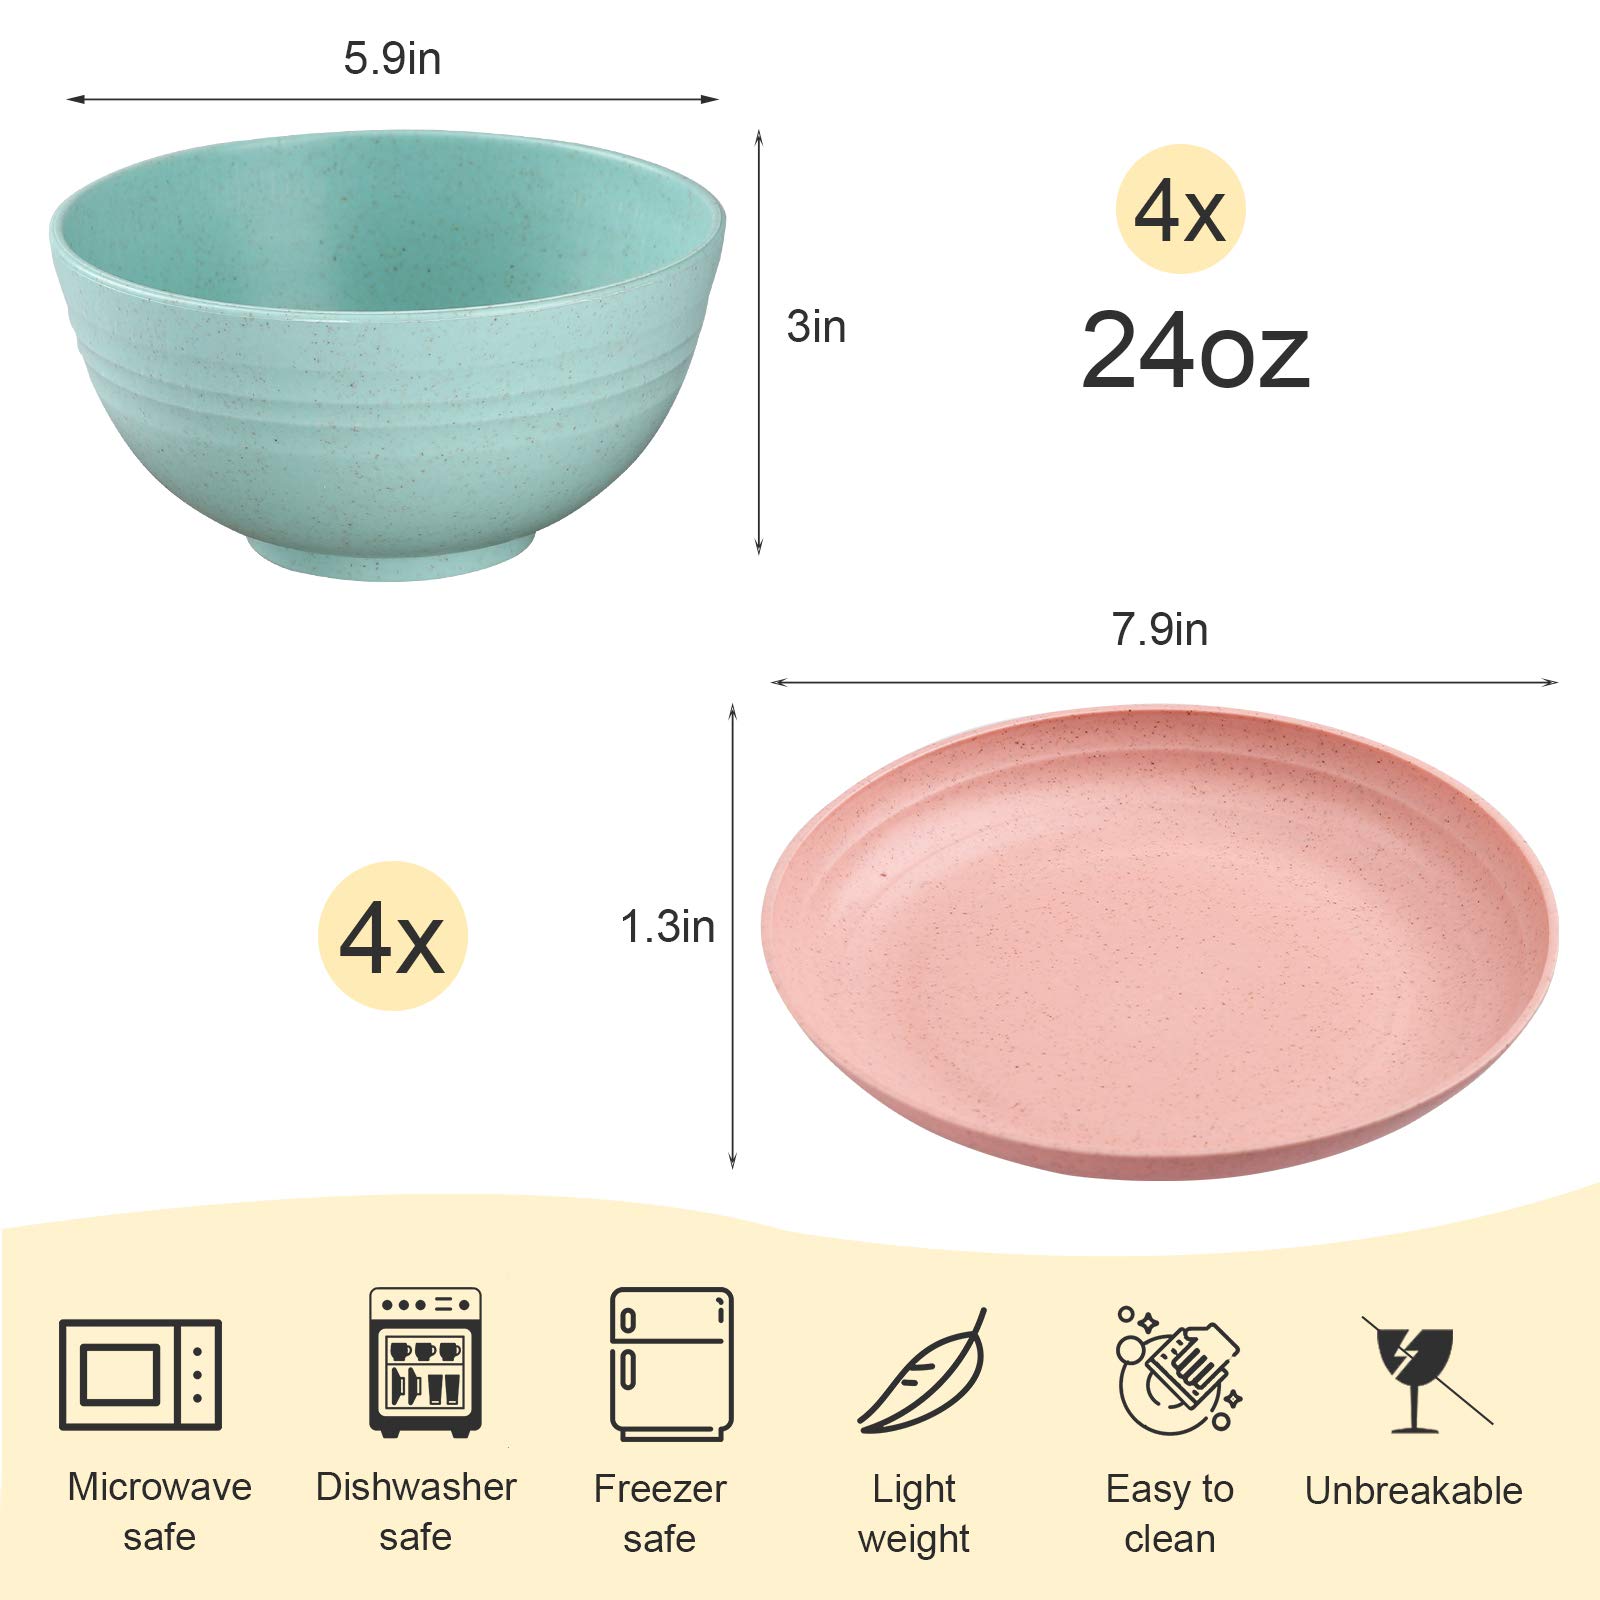 Wheat Straw Dinnerware Set Unbreakable Lightweight Cereal Plates and Bowls Sets Microwave Dishwasher Safe Reusable Eco Friendly Tableware for Kids Adults, Service for 4